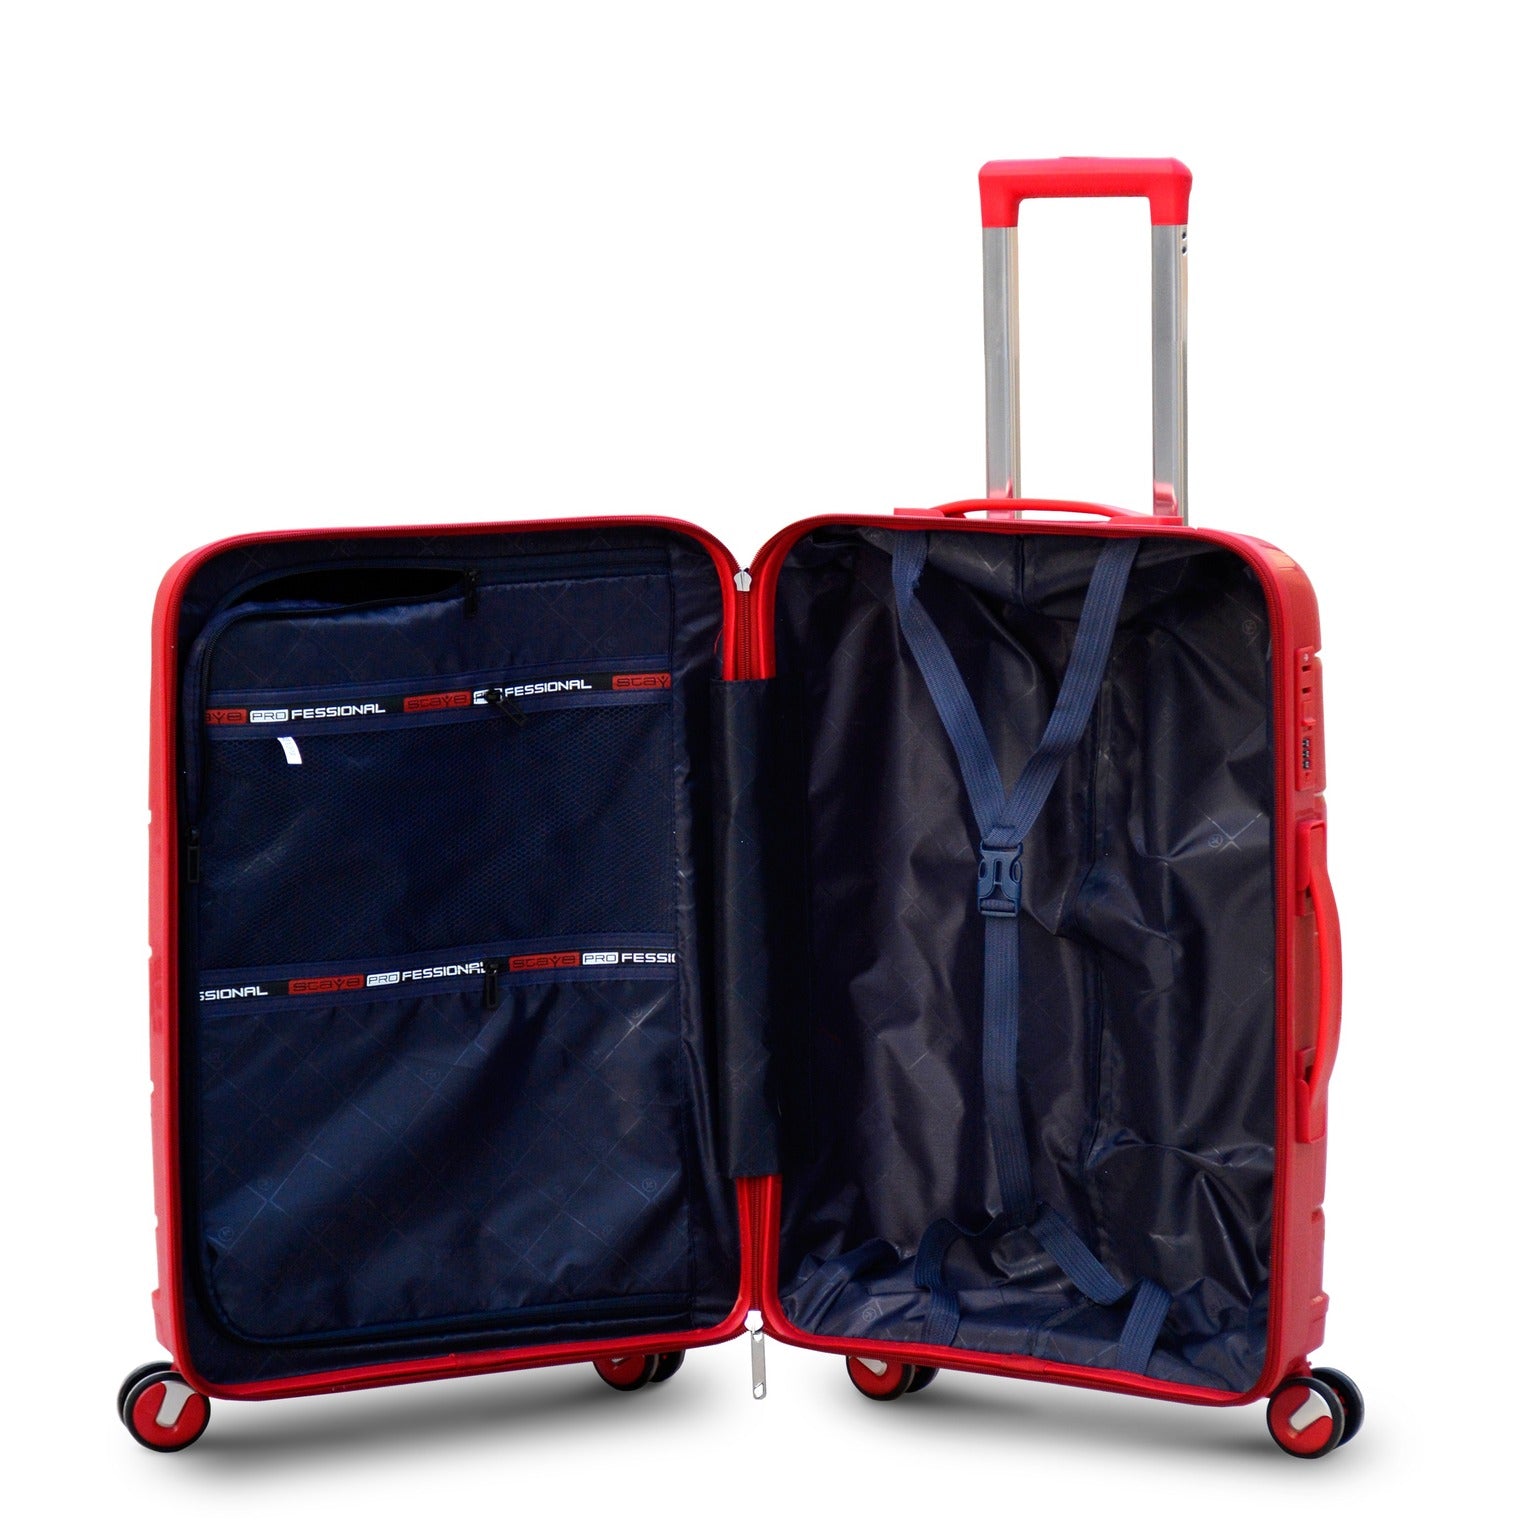 3 Piece Set 20" 24" 28 Inches Red Ceramic Smooth PP Lightweight Luggage Bag With Double Spinner Wheel